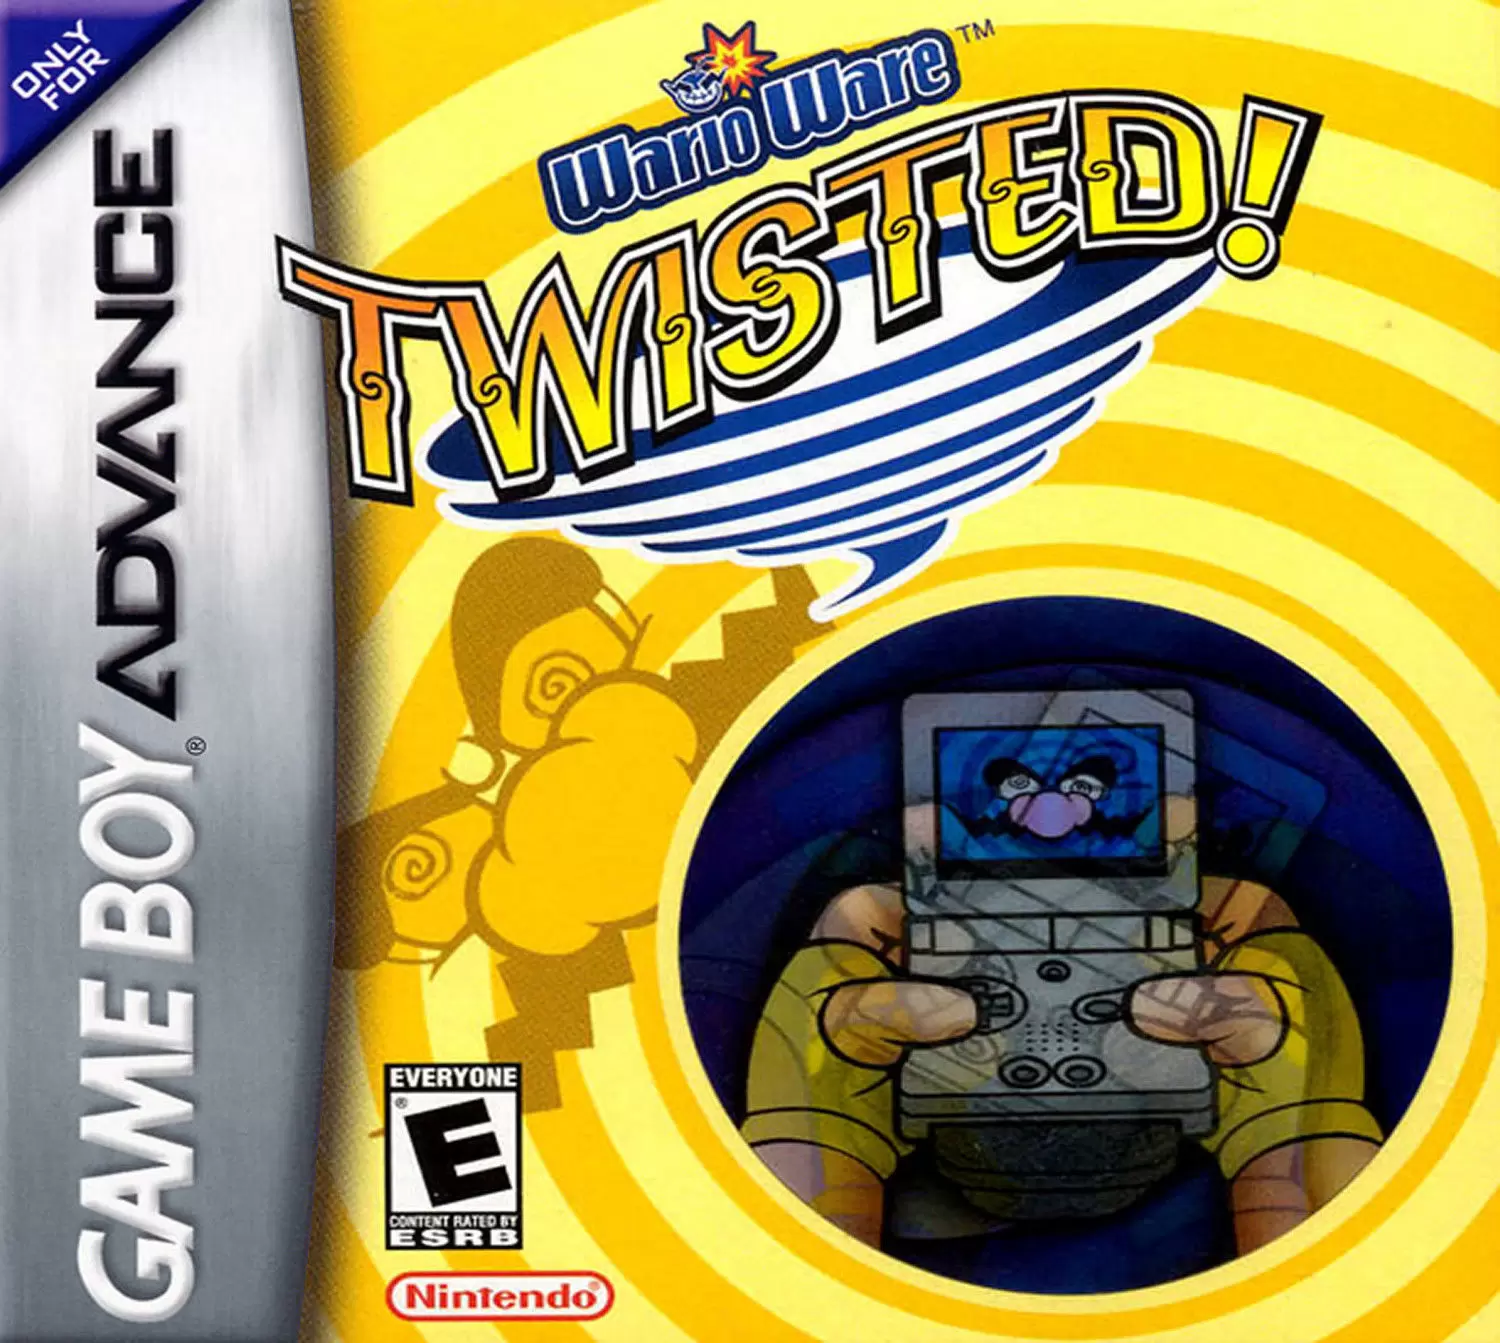 Game Boy Advance Games - WarioWare: Twisted!